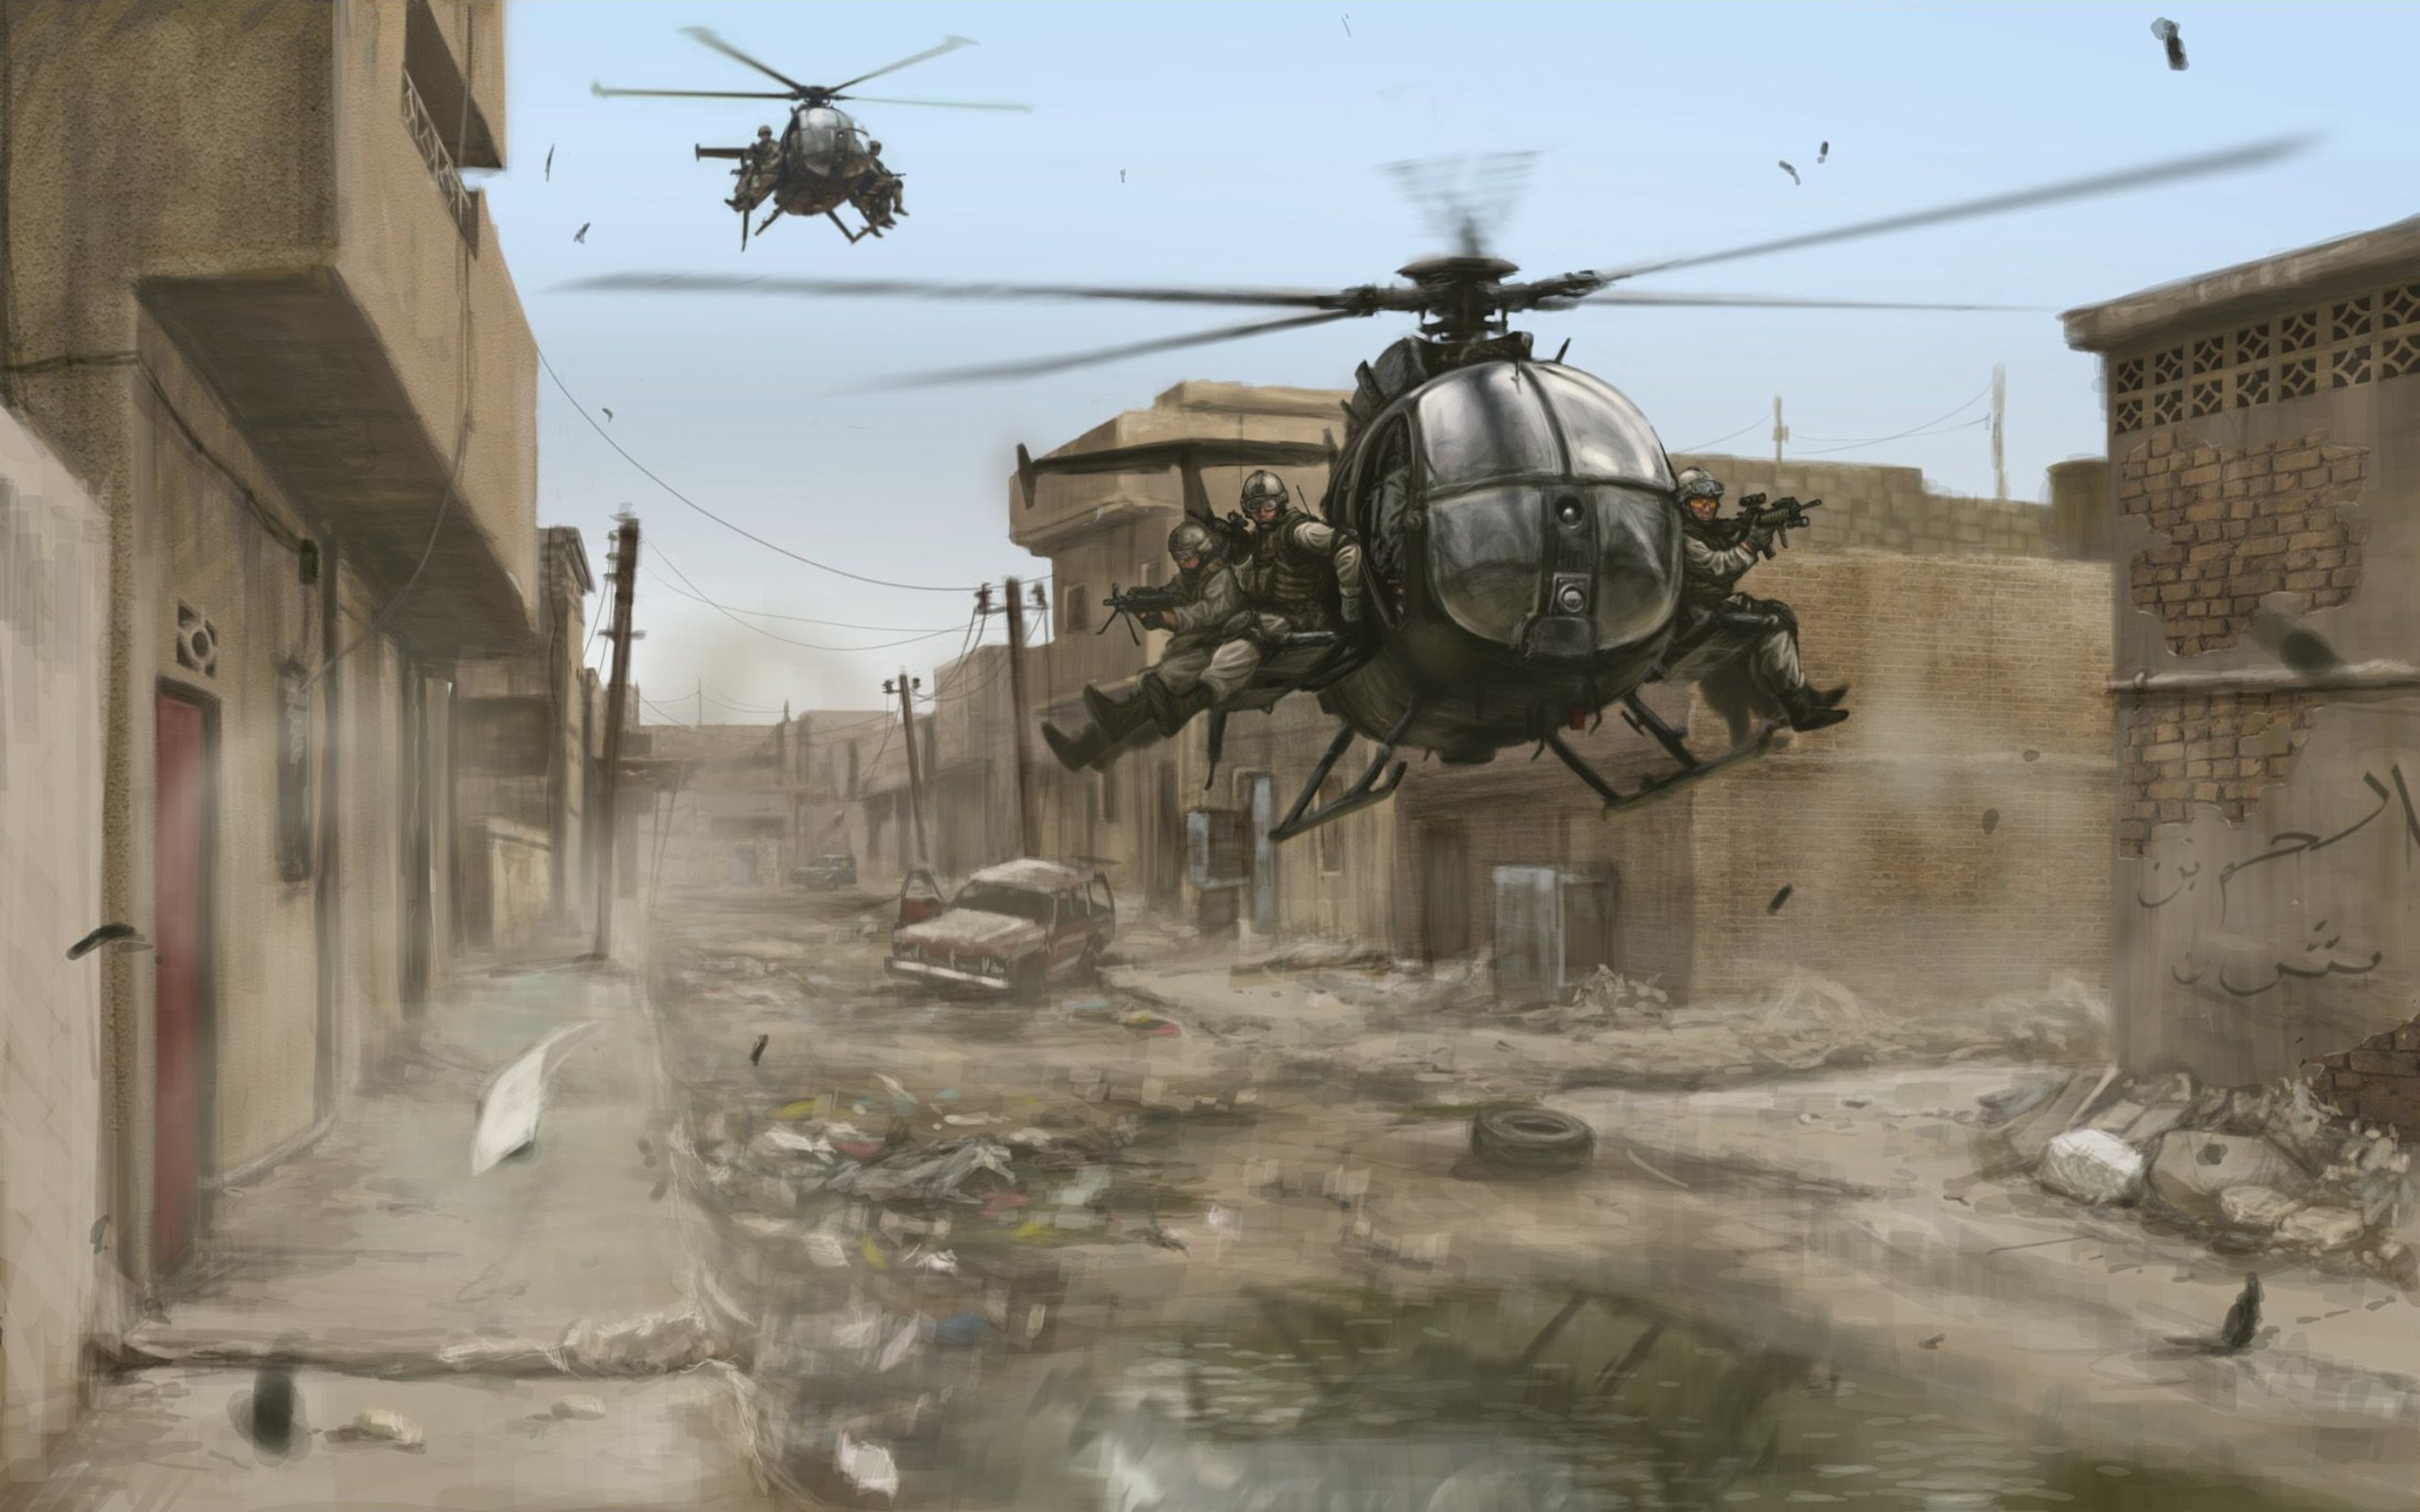 soldiers, cityscapes, military, helicopters, buildings, artwork, Black Hawk Down, vehicles, delta force - desktop wallpaper